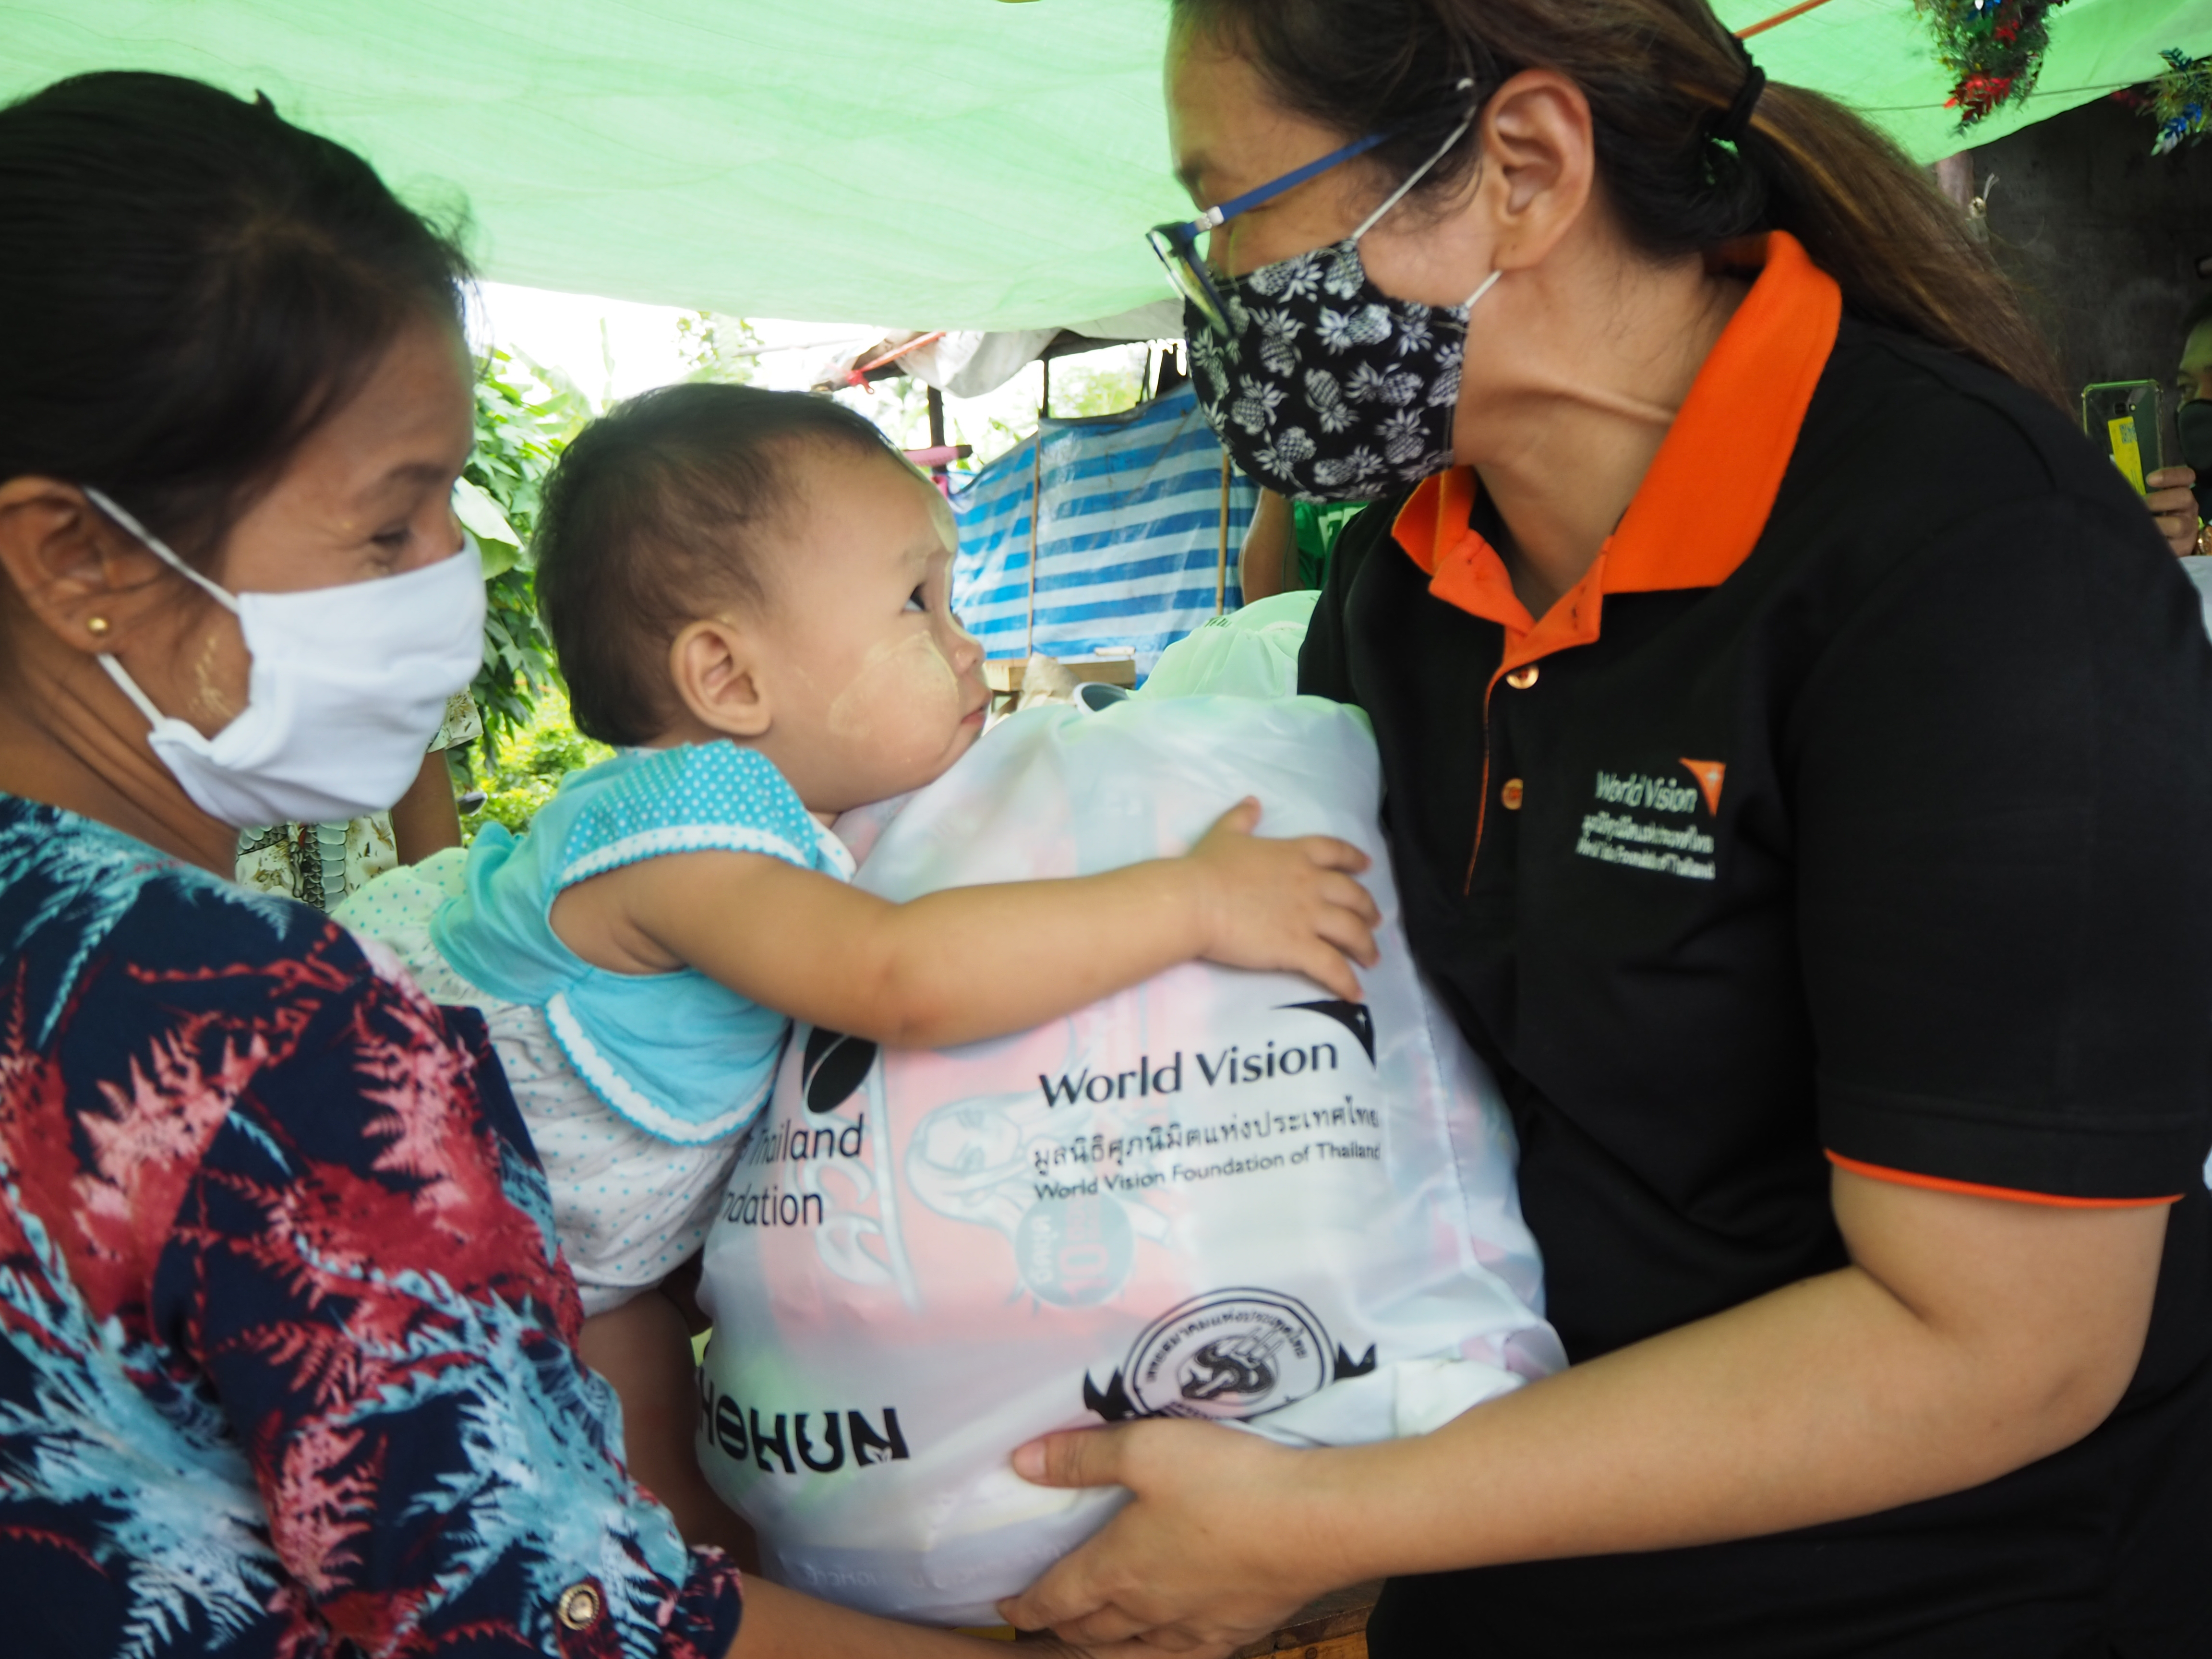 Staff member in a mask hands over a bag to support families and prevent the spread of COVID-19 in Thailand. The woman receiving the bag smiles as her child clings onto the bag